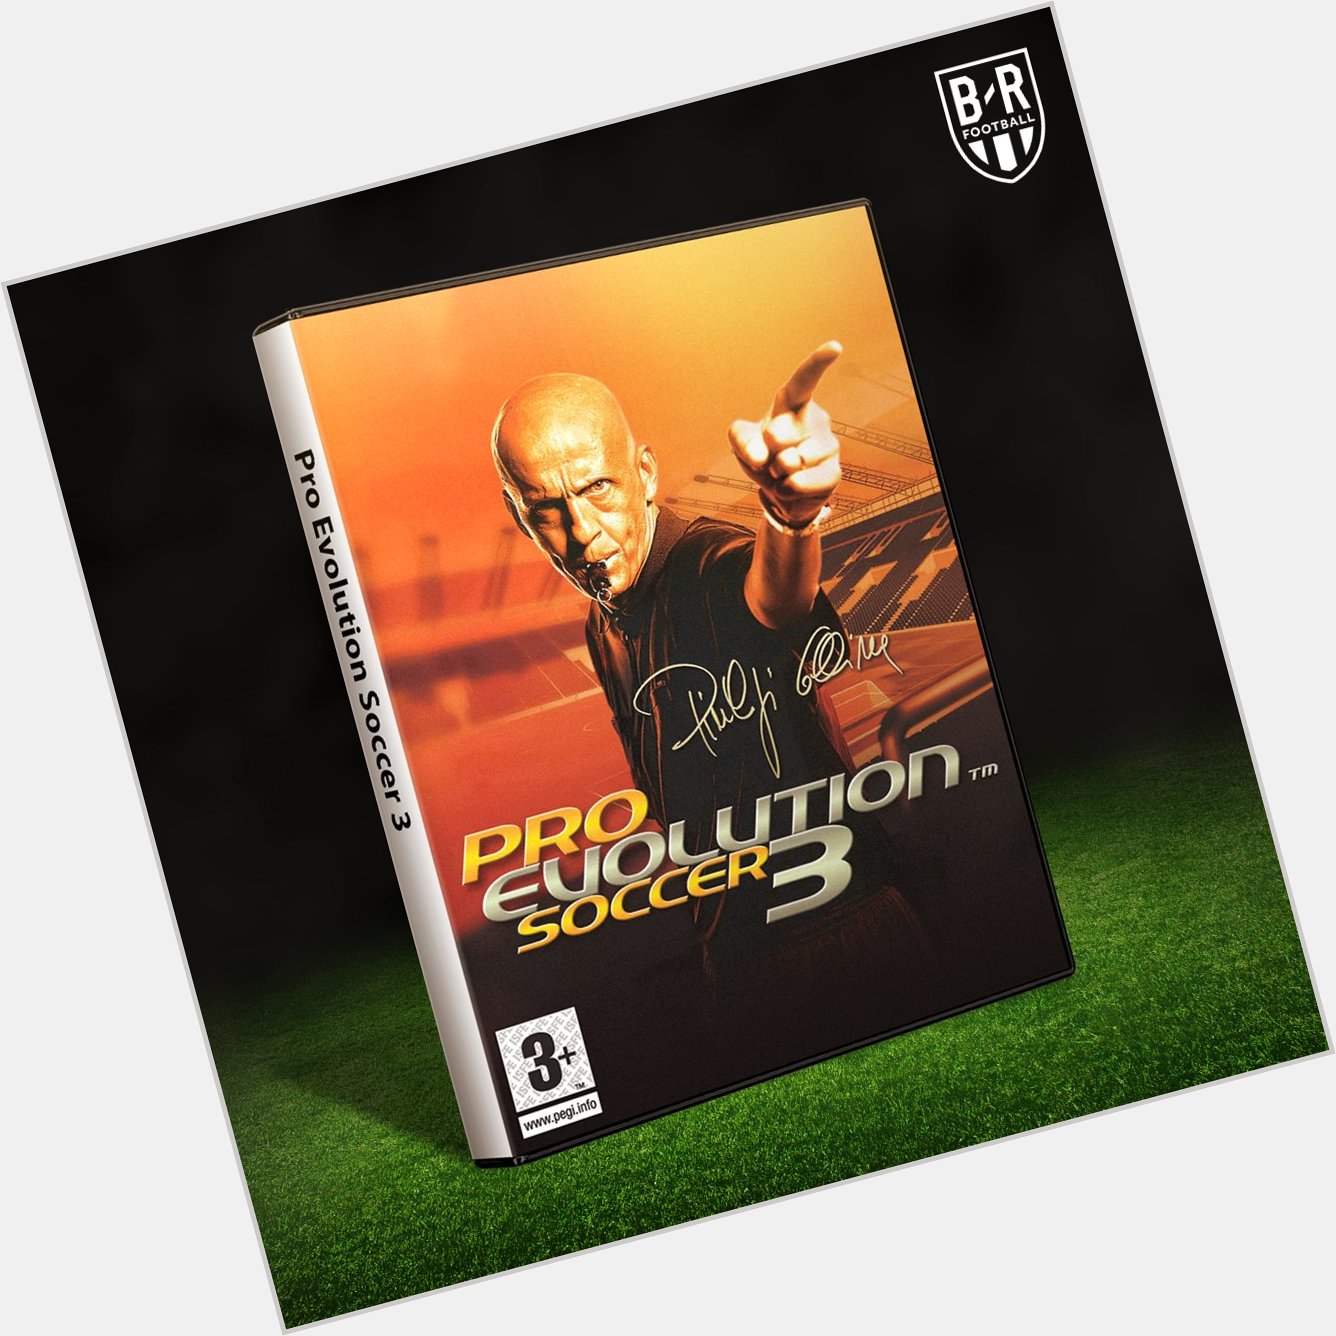 Happy birthday Pierluigi Collina the only referee to feature on the cover of a video game 